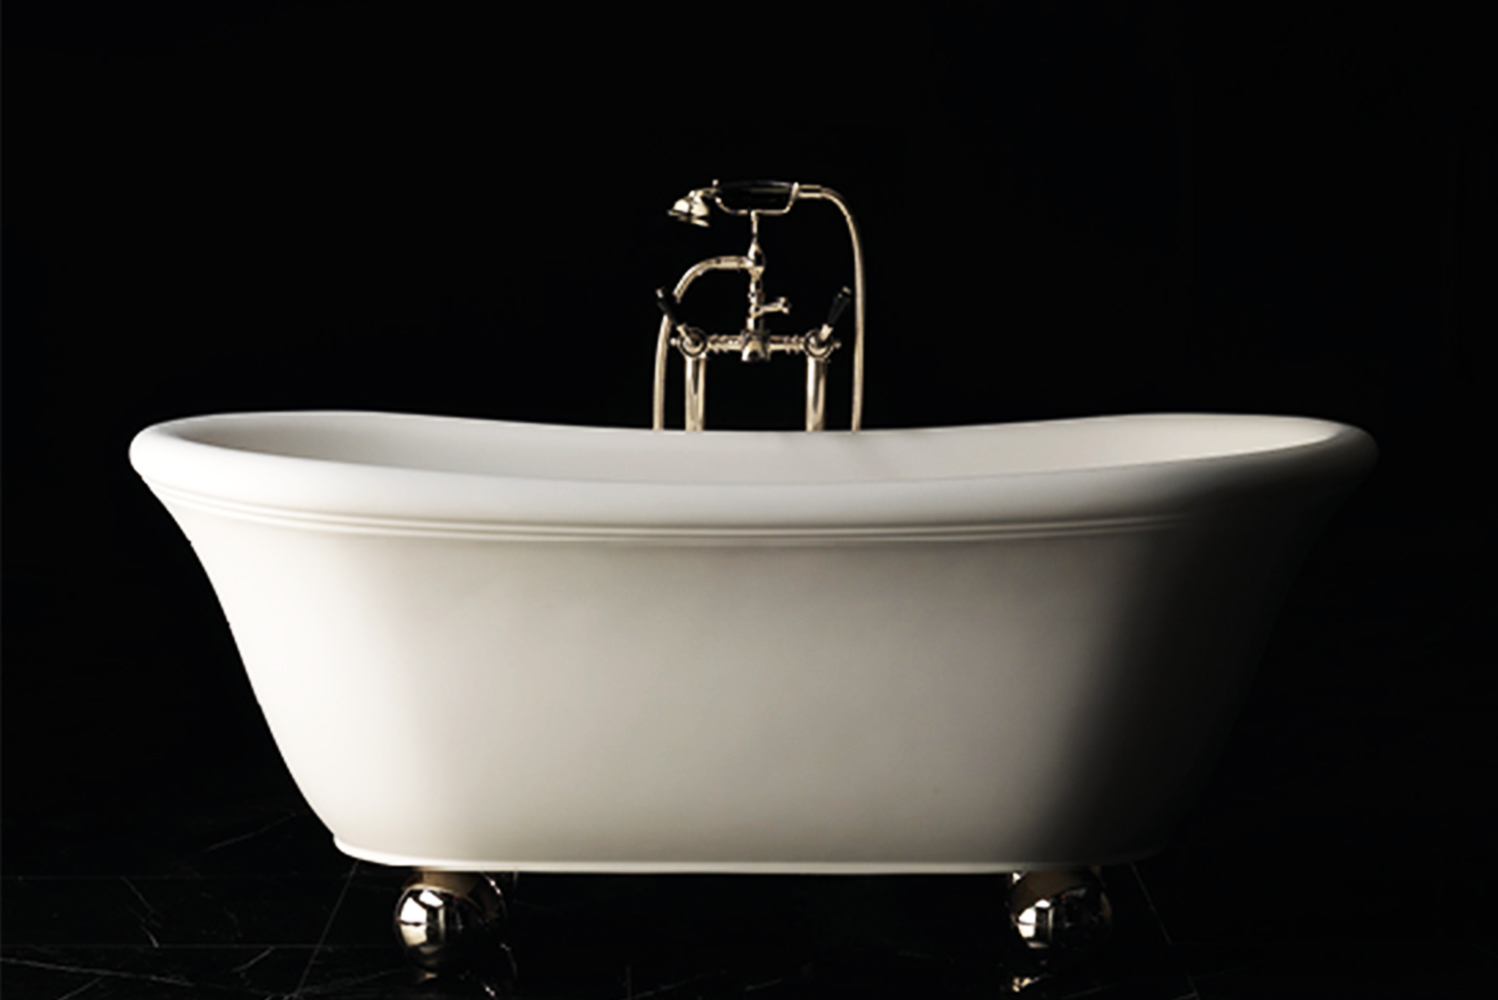 Devon  Devon launched the Morris collection of taps and fittings inspired by 1940s chic